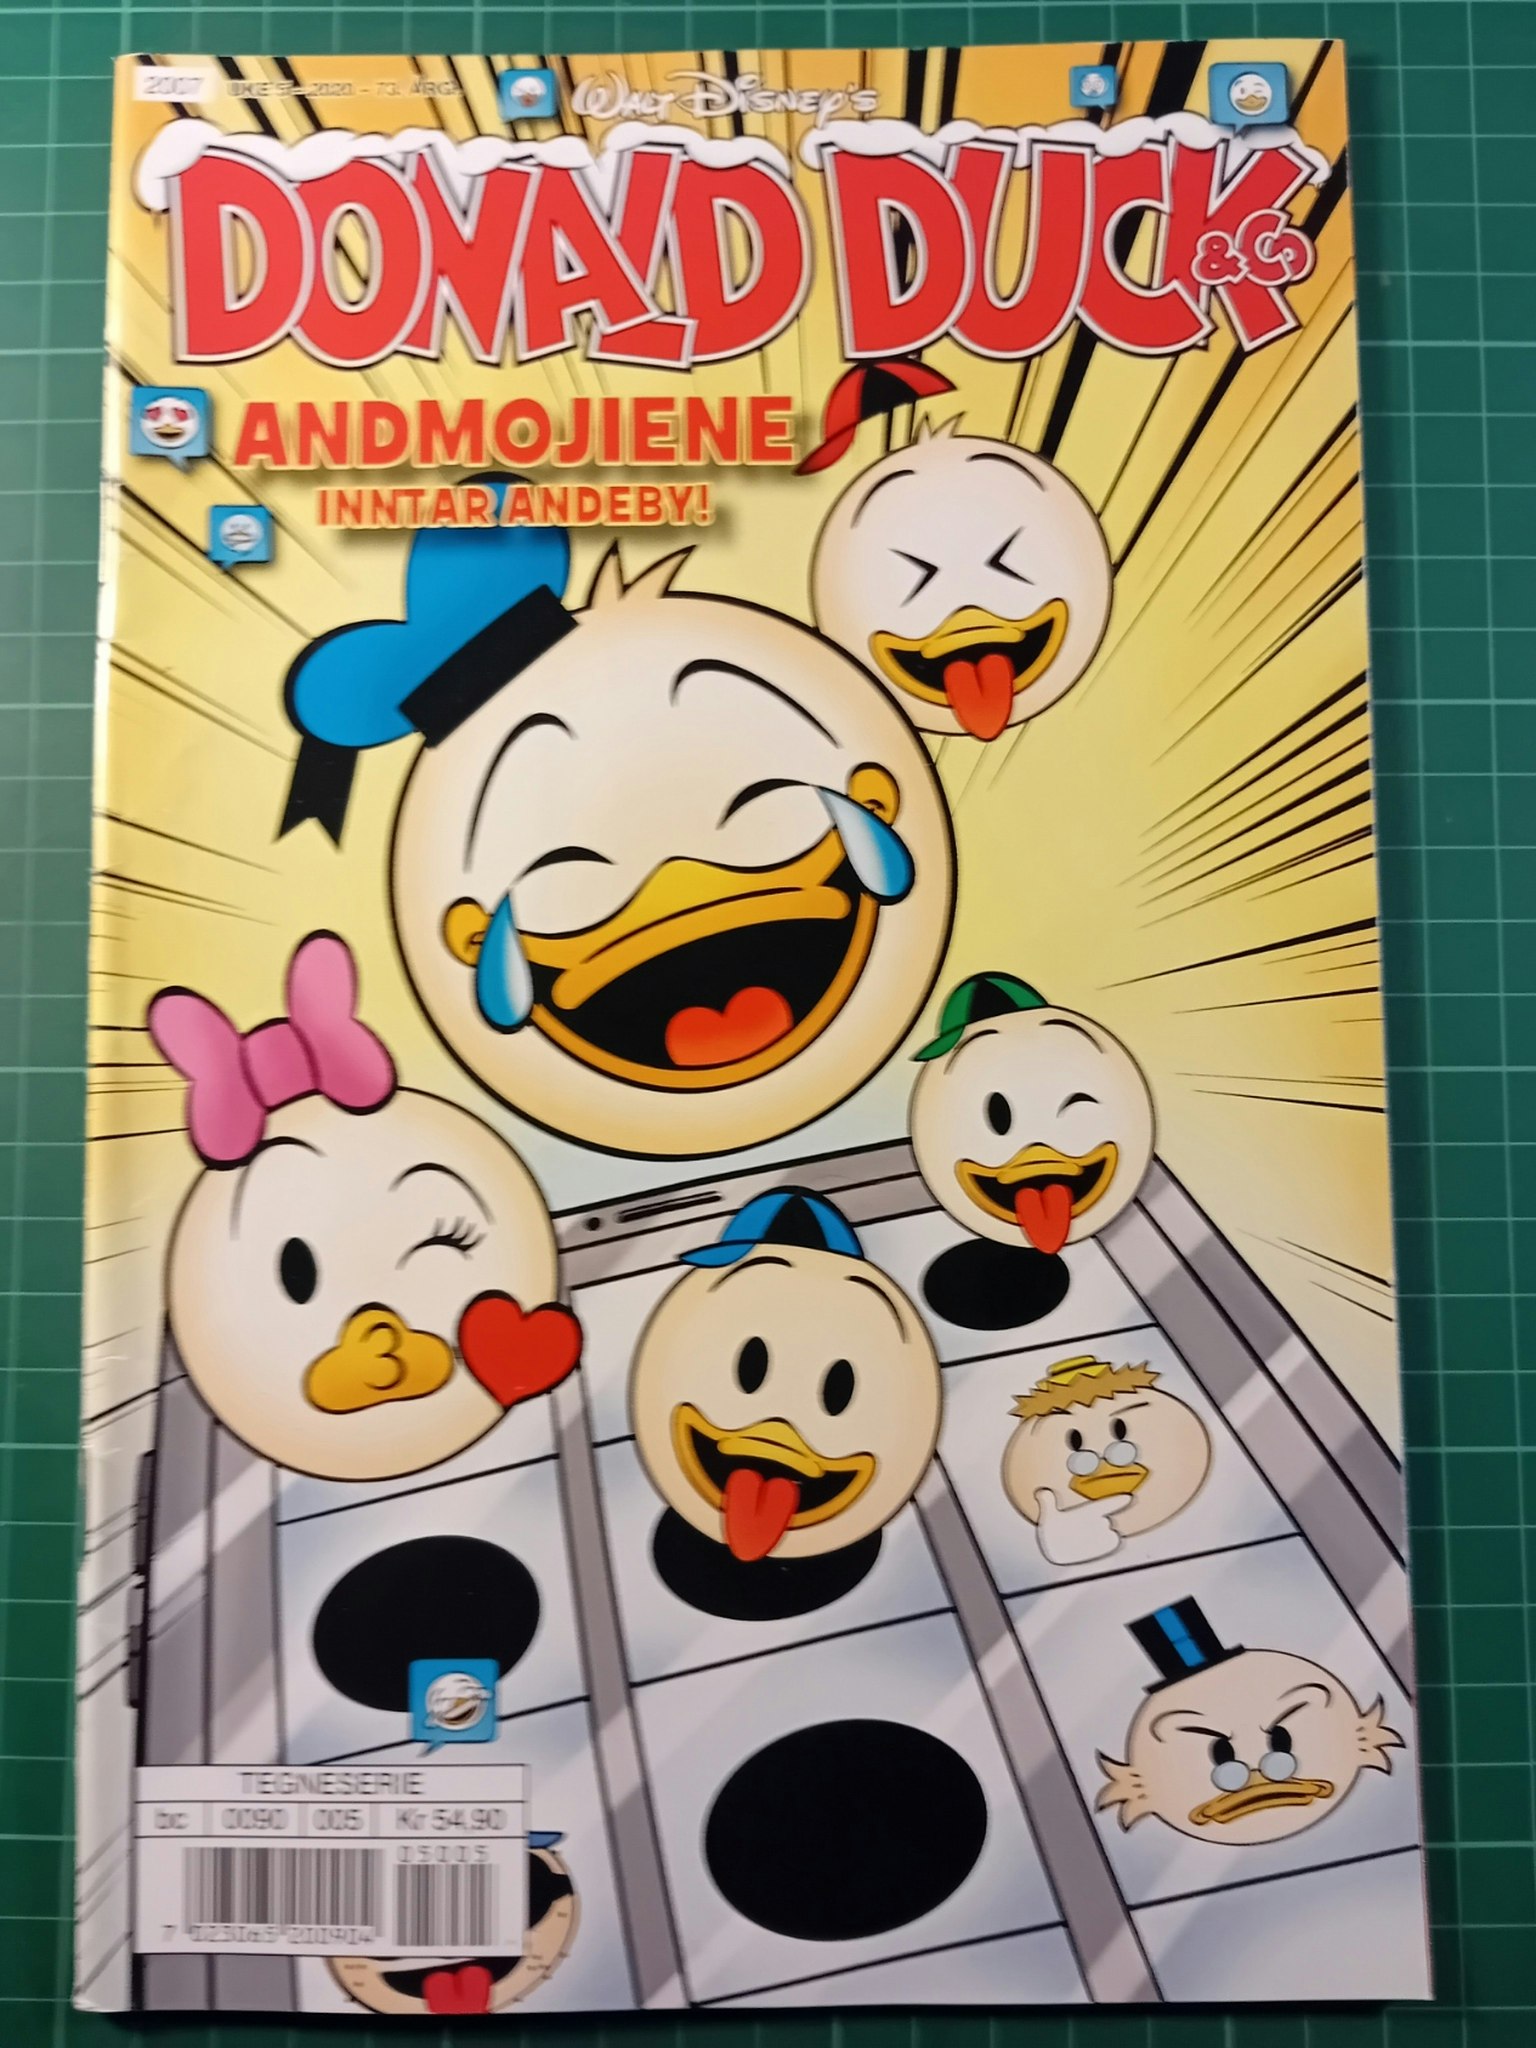 Donald Duck & Co 2020 - 05